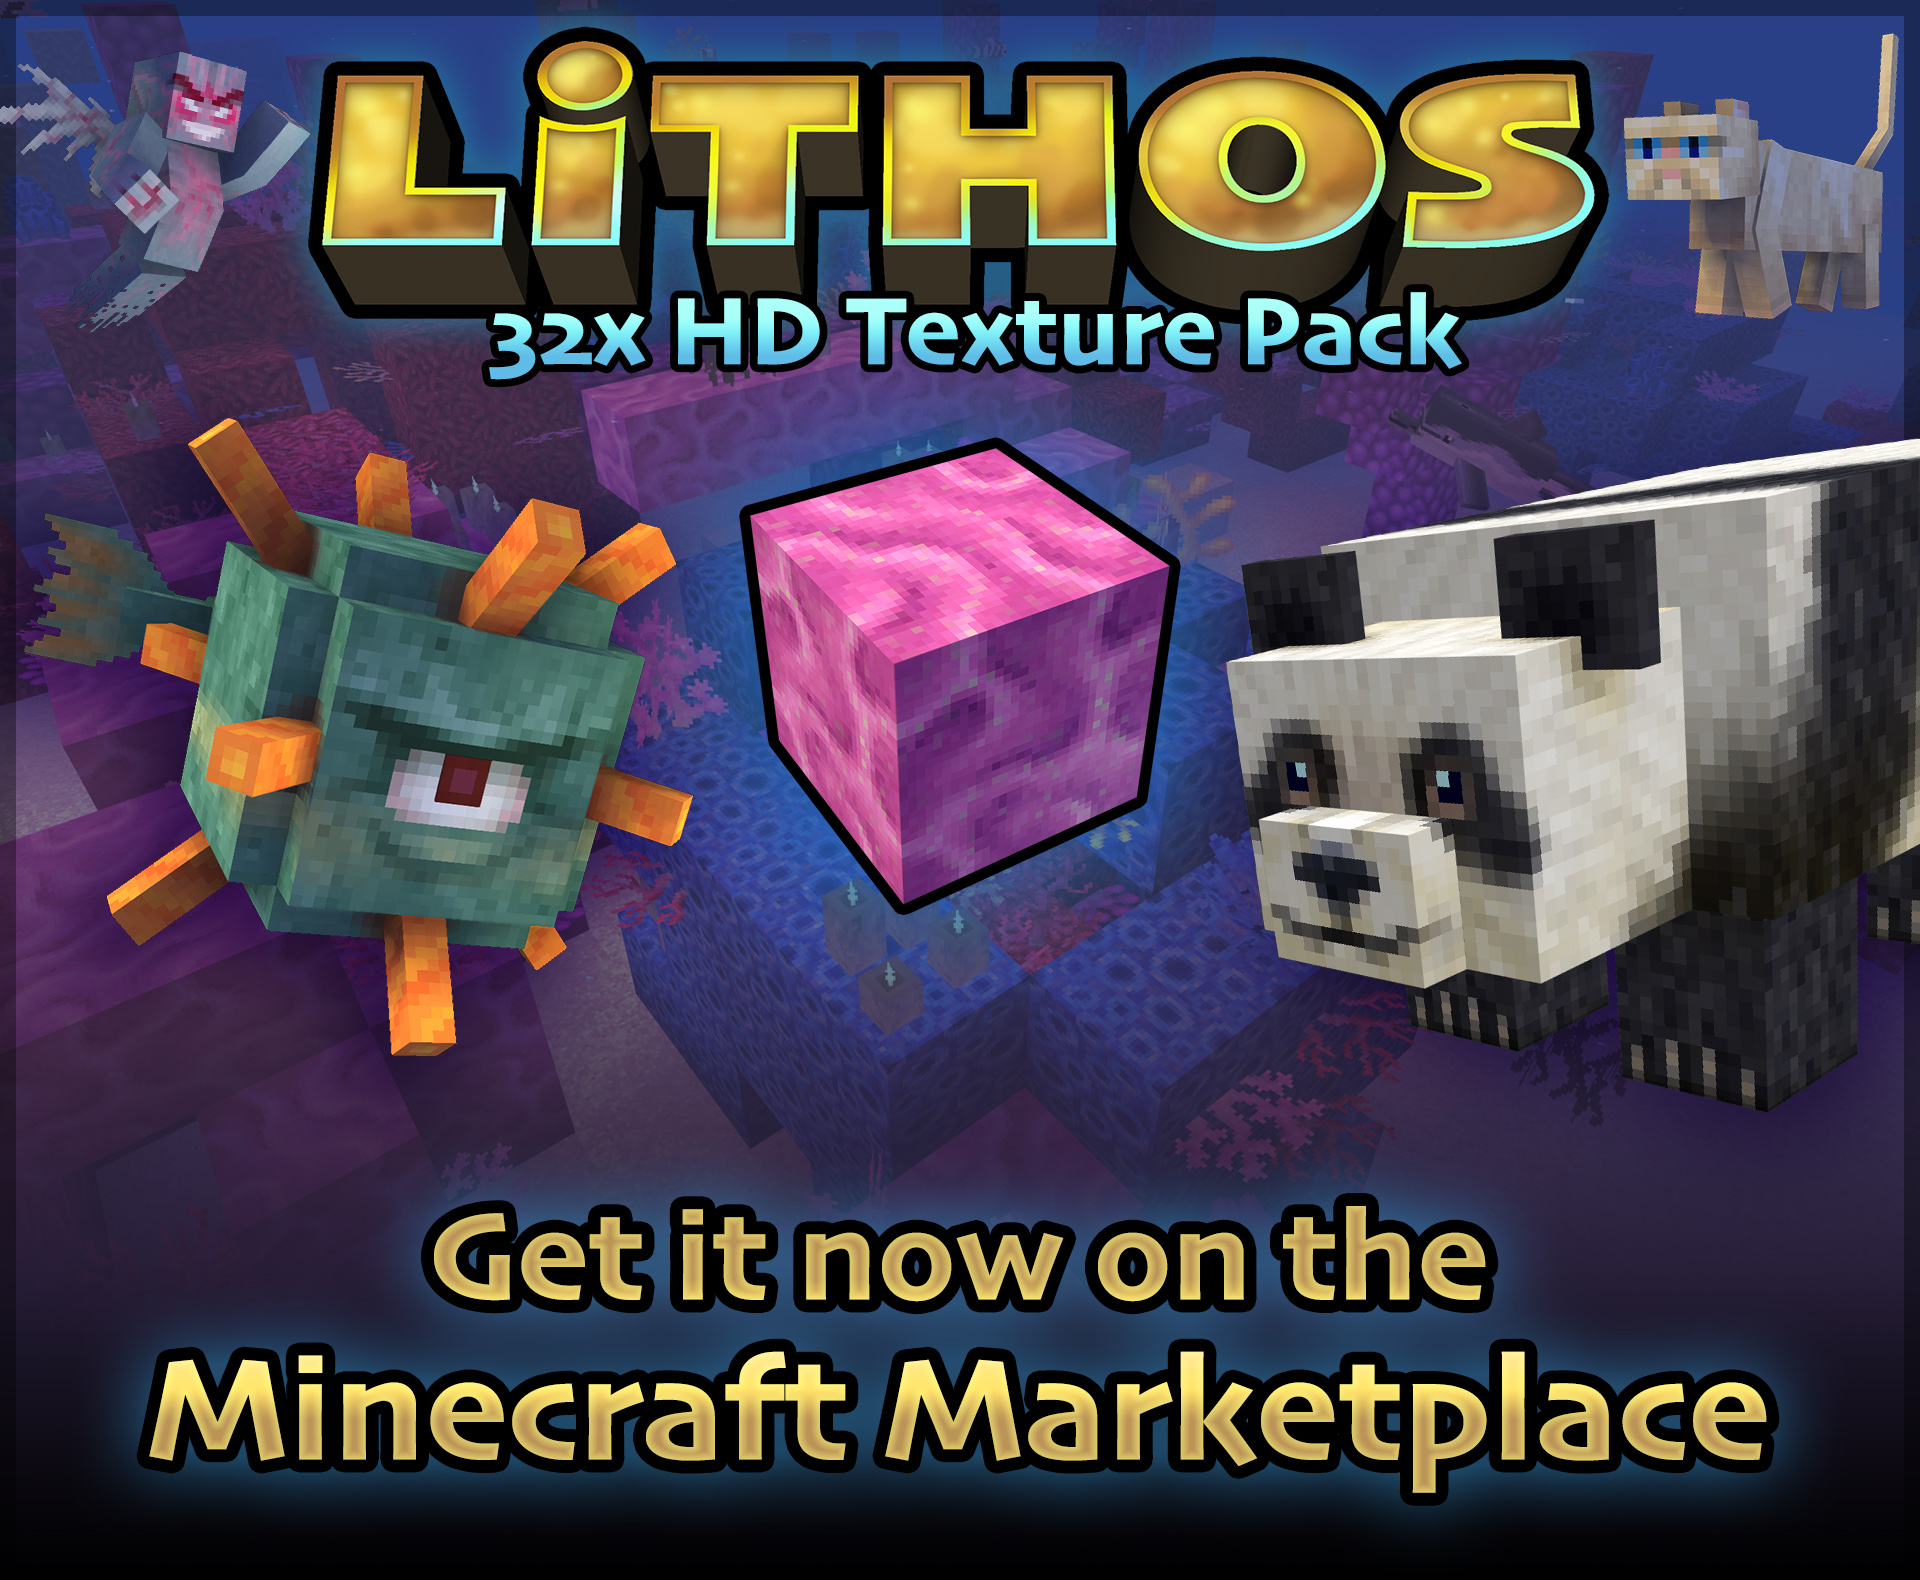 Lithos-Core-Resource-Pack